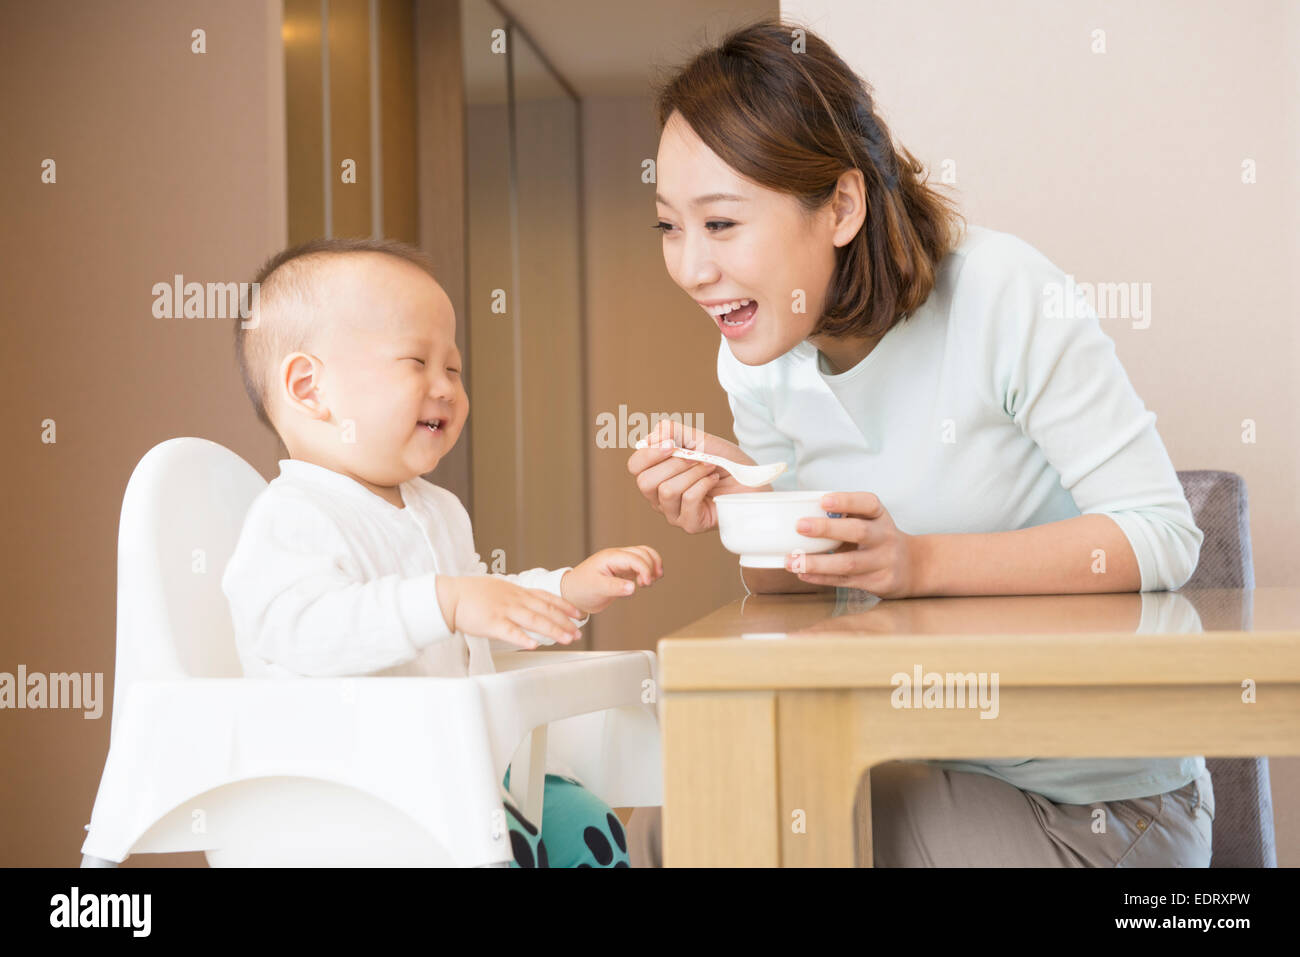 Young mother feeding baby boy Stock Photo